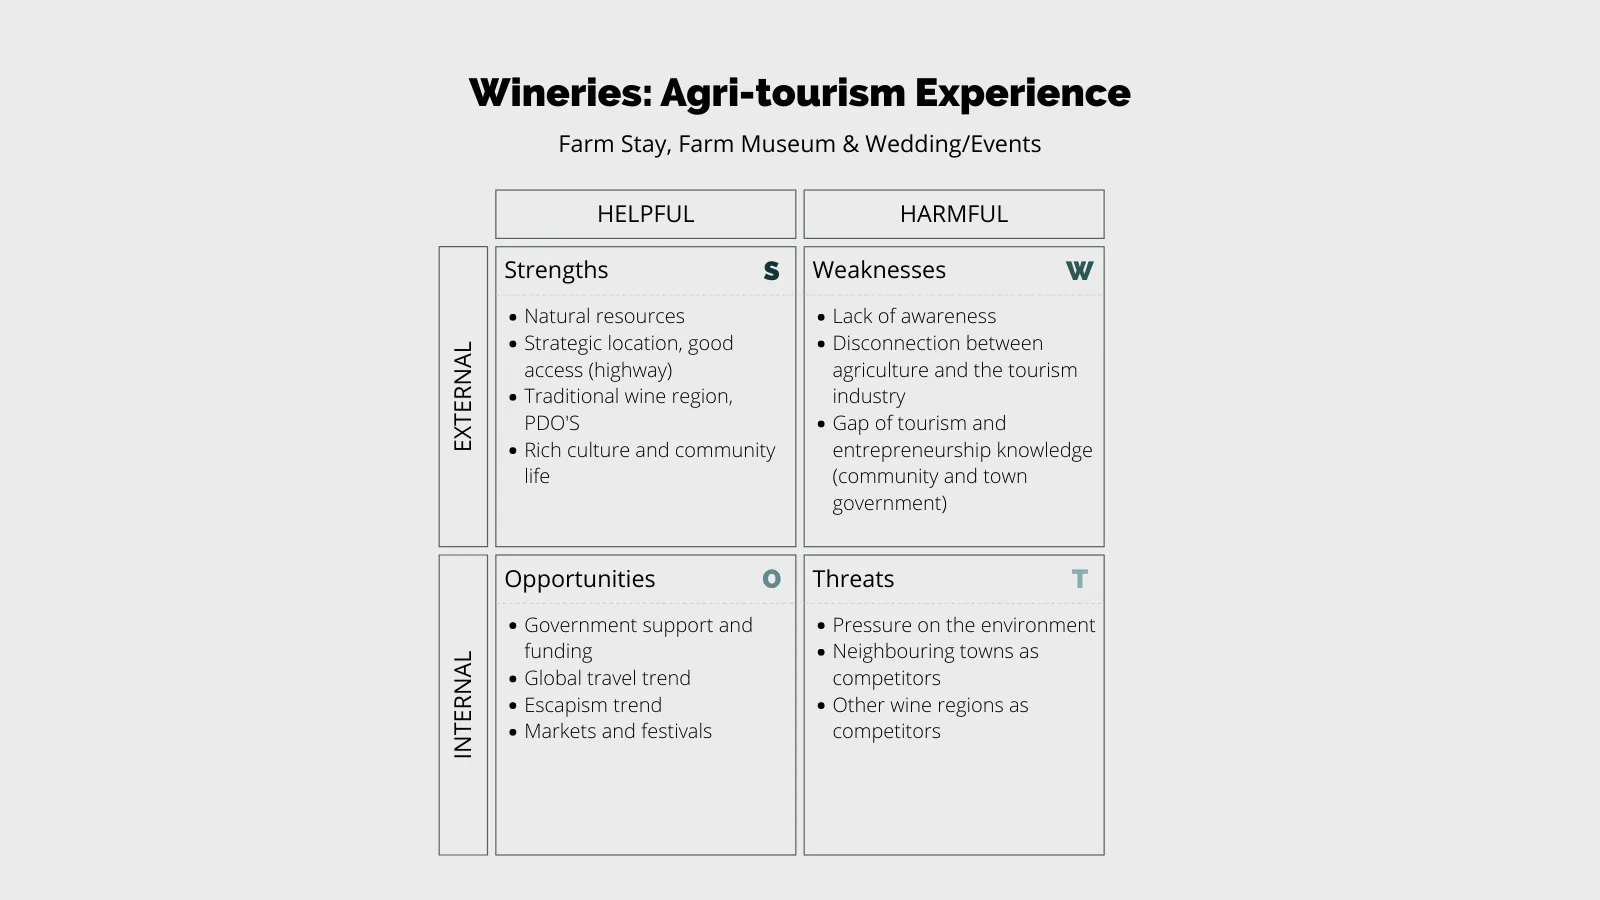 SWOT Analysis example: Wineries: Agri-tourism Experience